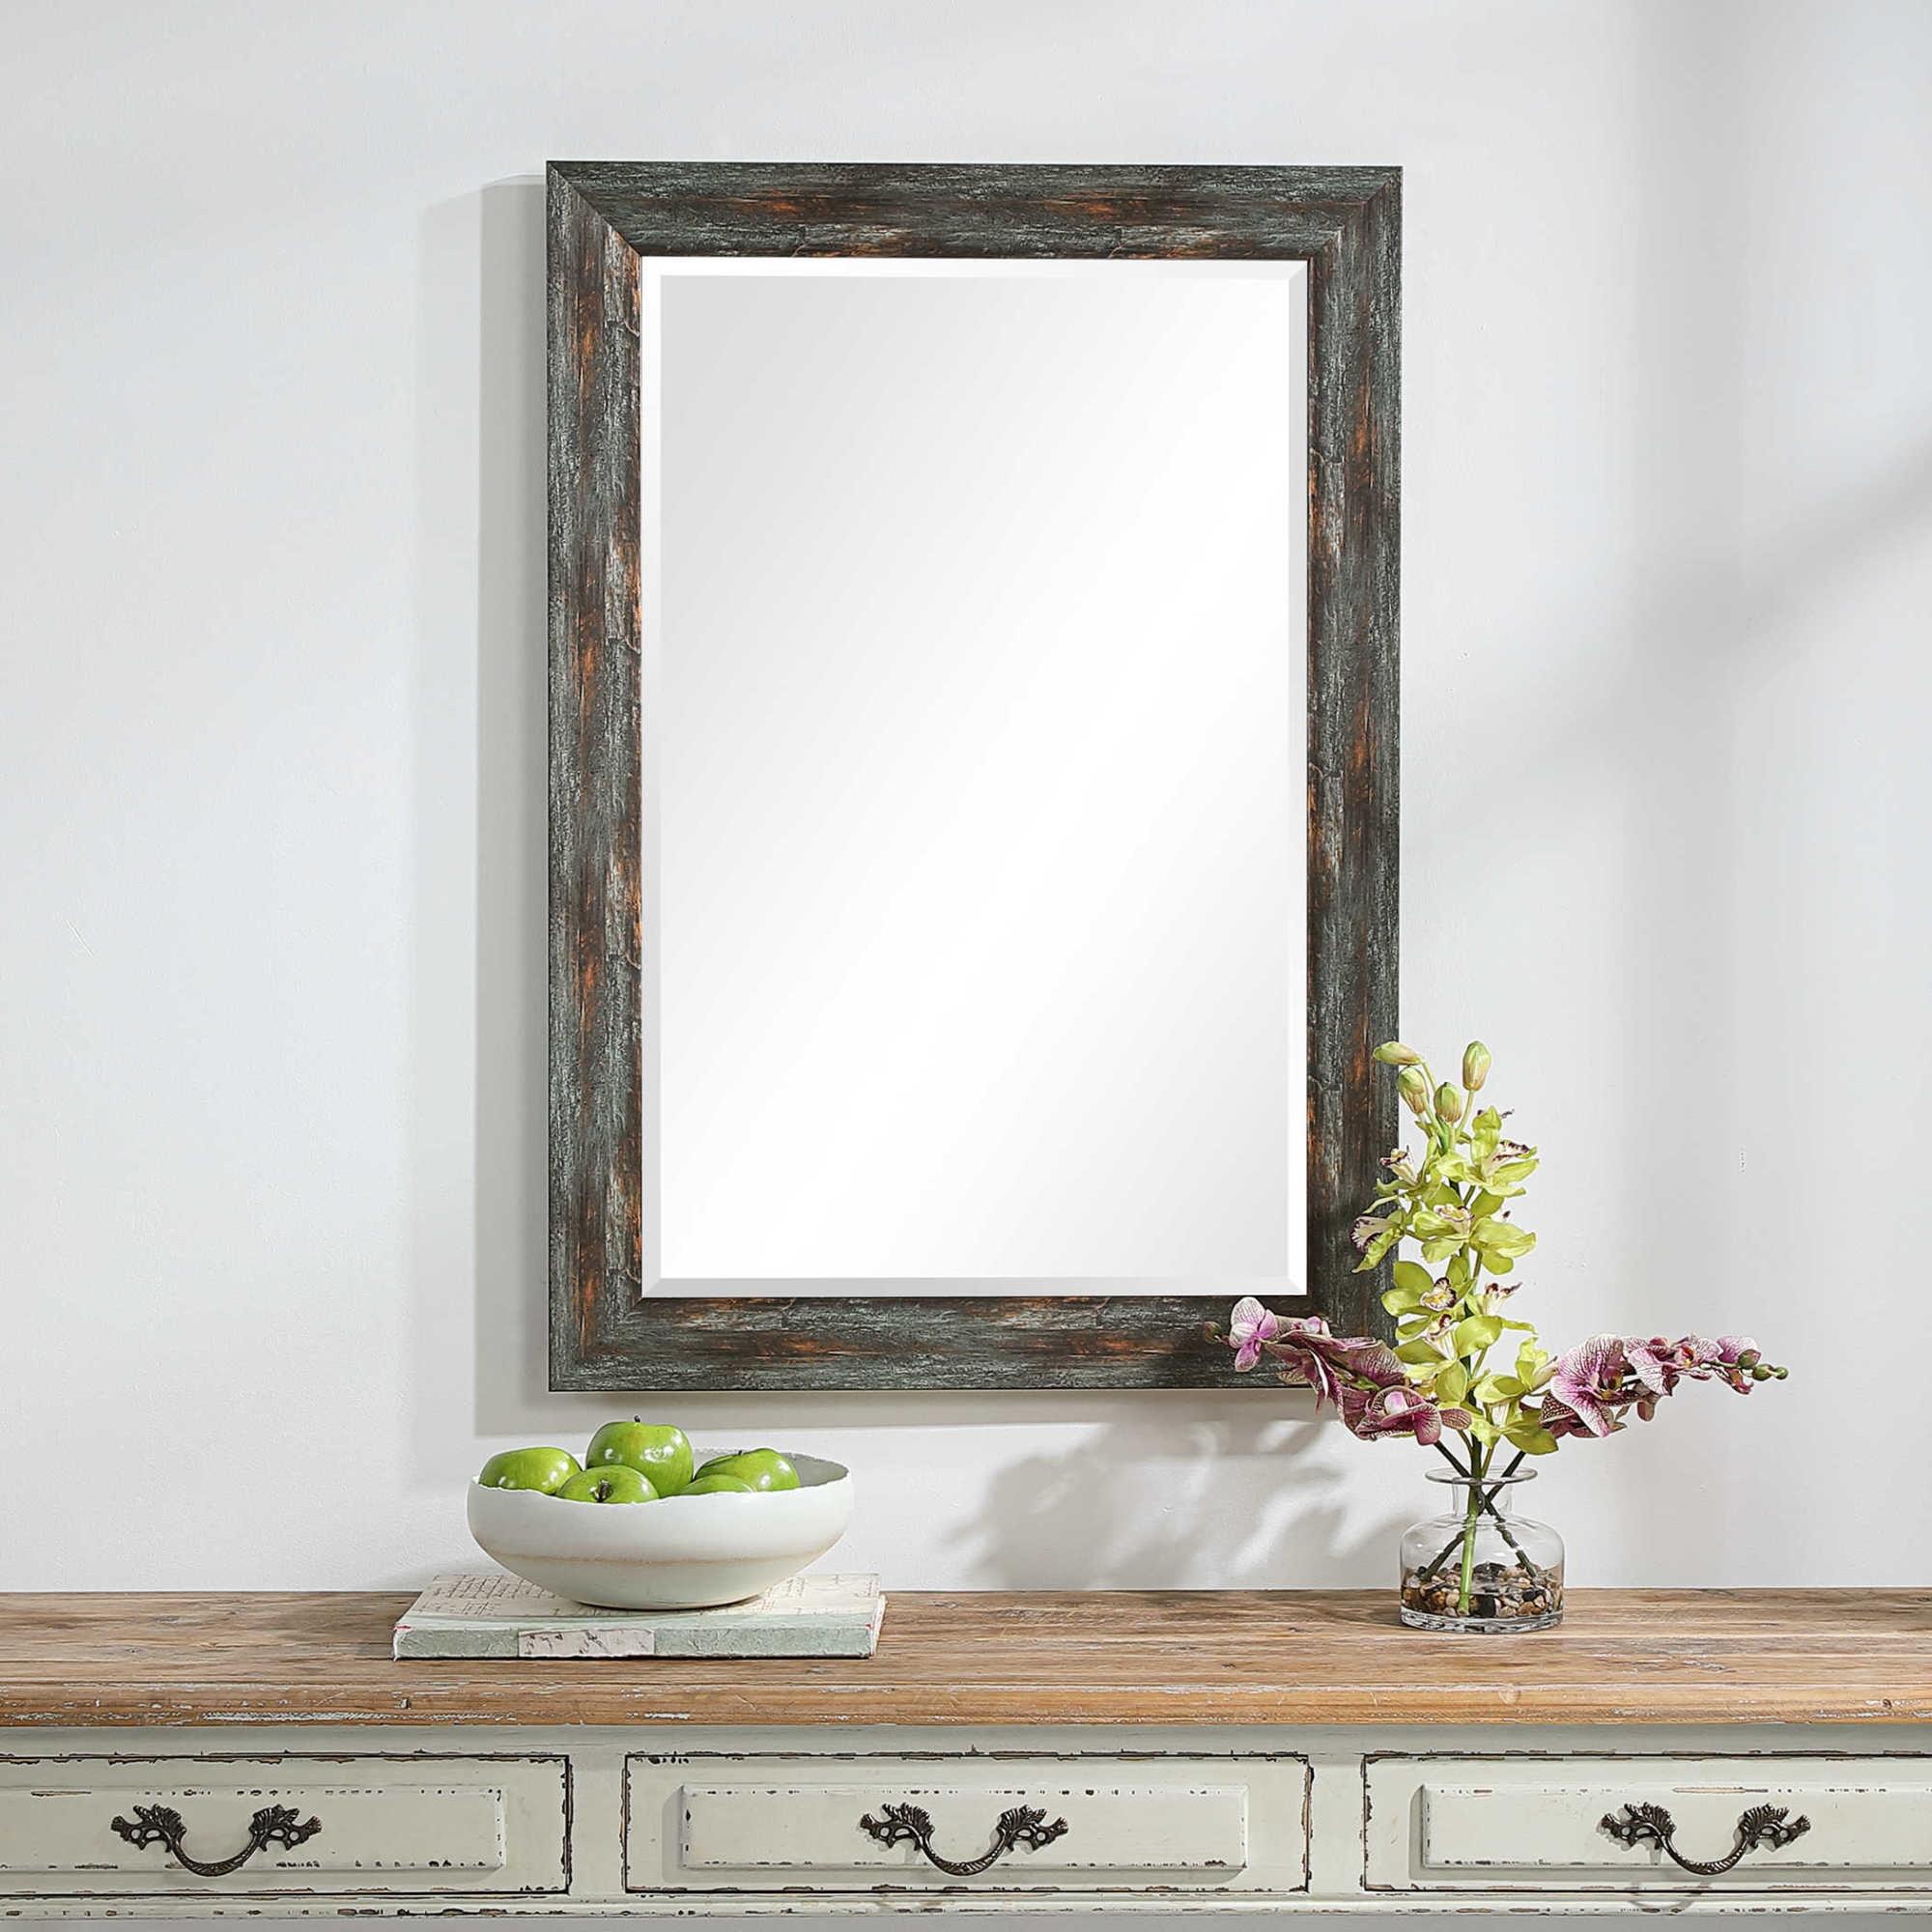 Transitional Rustic Rectangular Wood Mirror with Silver and Bronze Accents